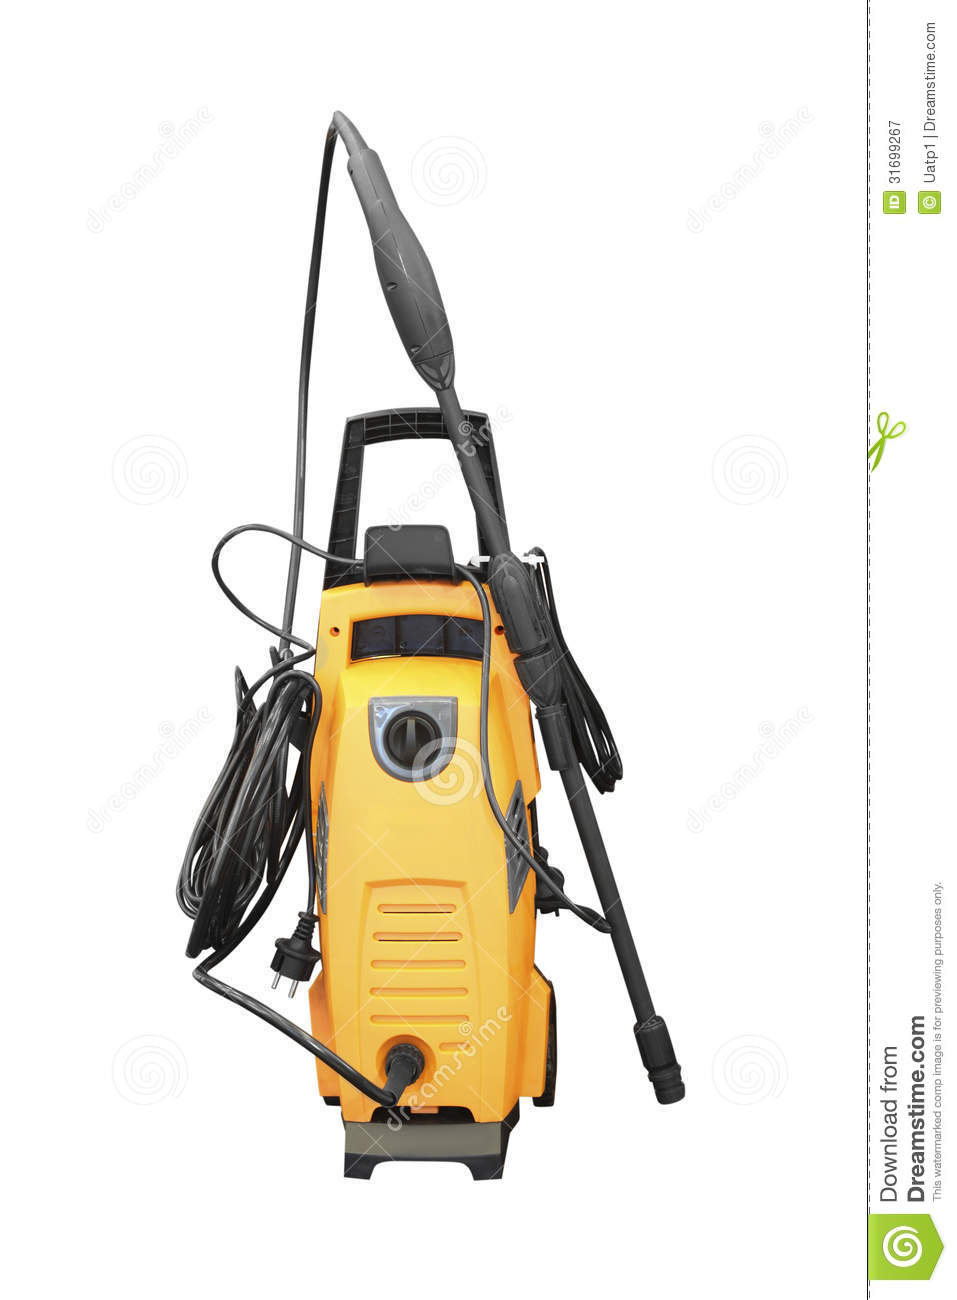 Pressure Washer Royalty Free Stock Photography   Image  31699267